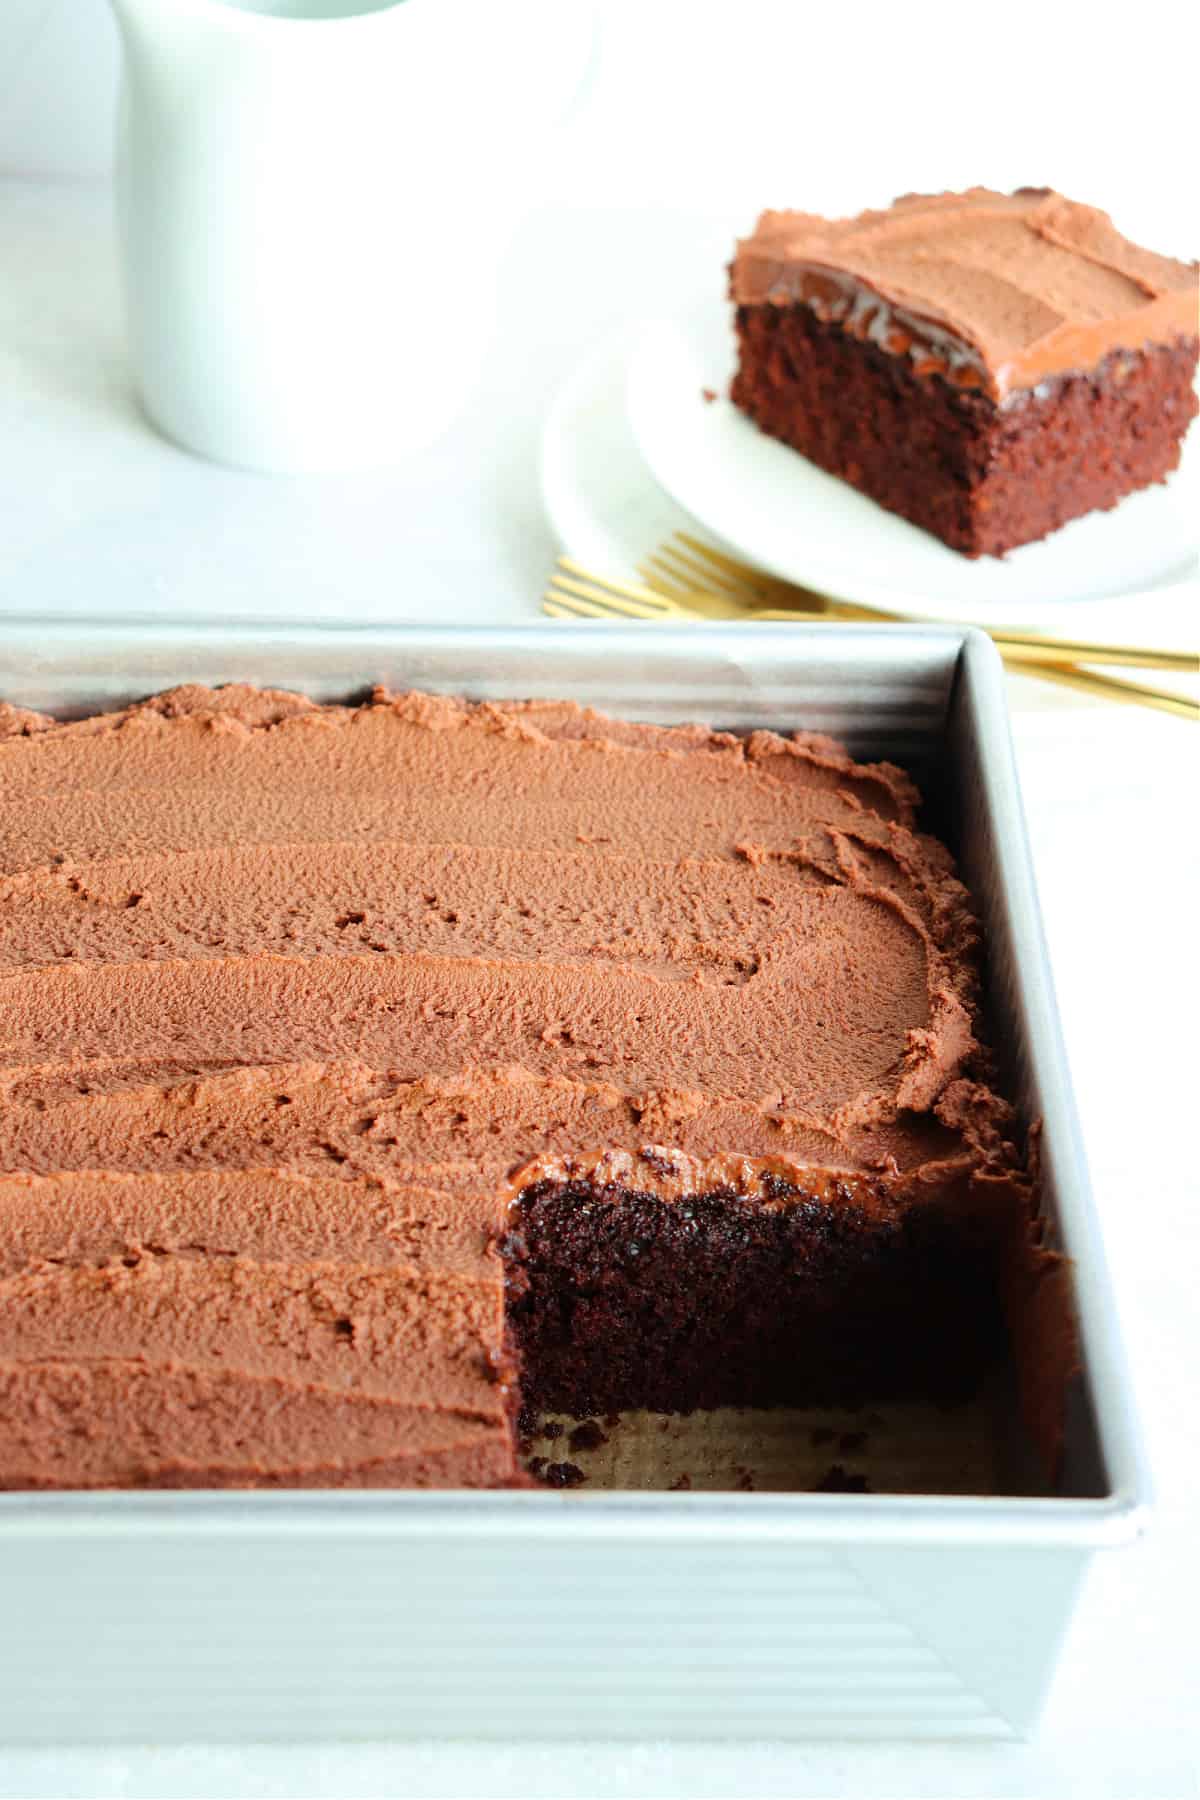 Frosted chocolate cake in a square baking pan with one piece cut out.